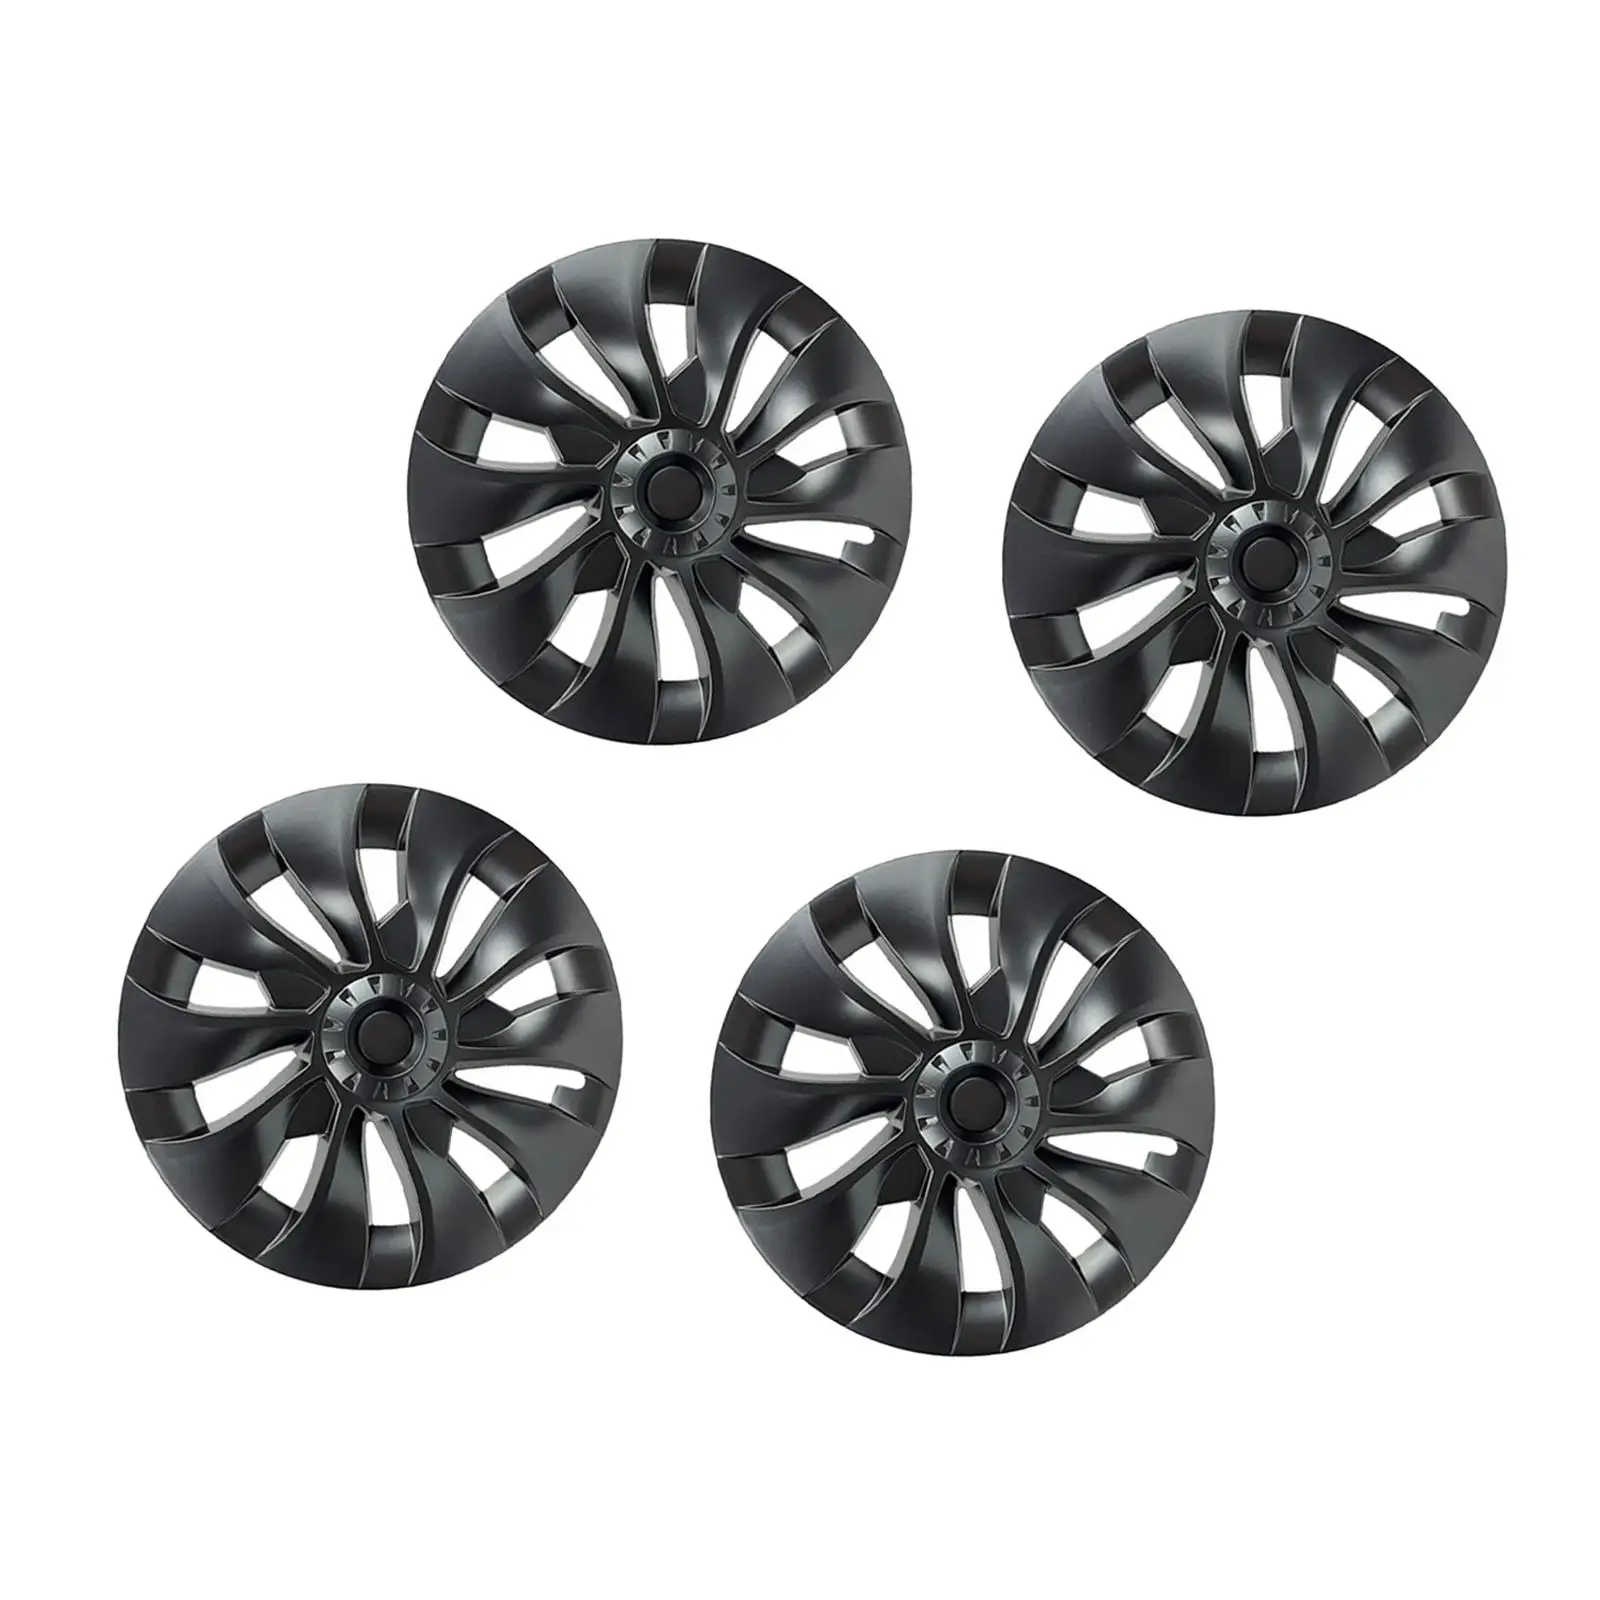 4 Pieces 18 inch Hub Cap Replacement Wheel Cap Cover Automobile Durable Full Rim Cover Replacement Hubcap for Tesla Model 3